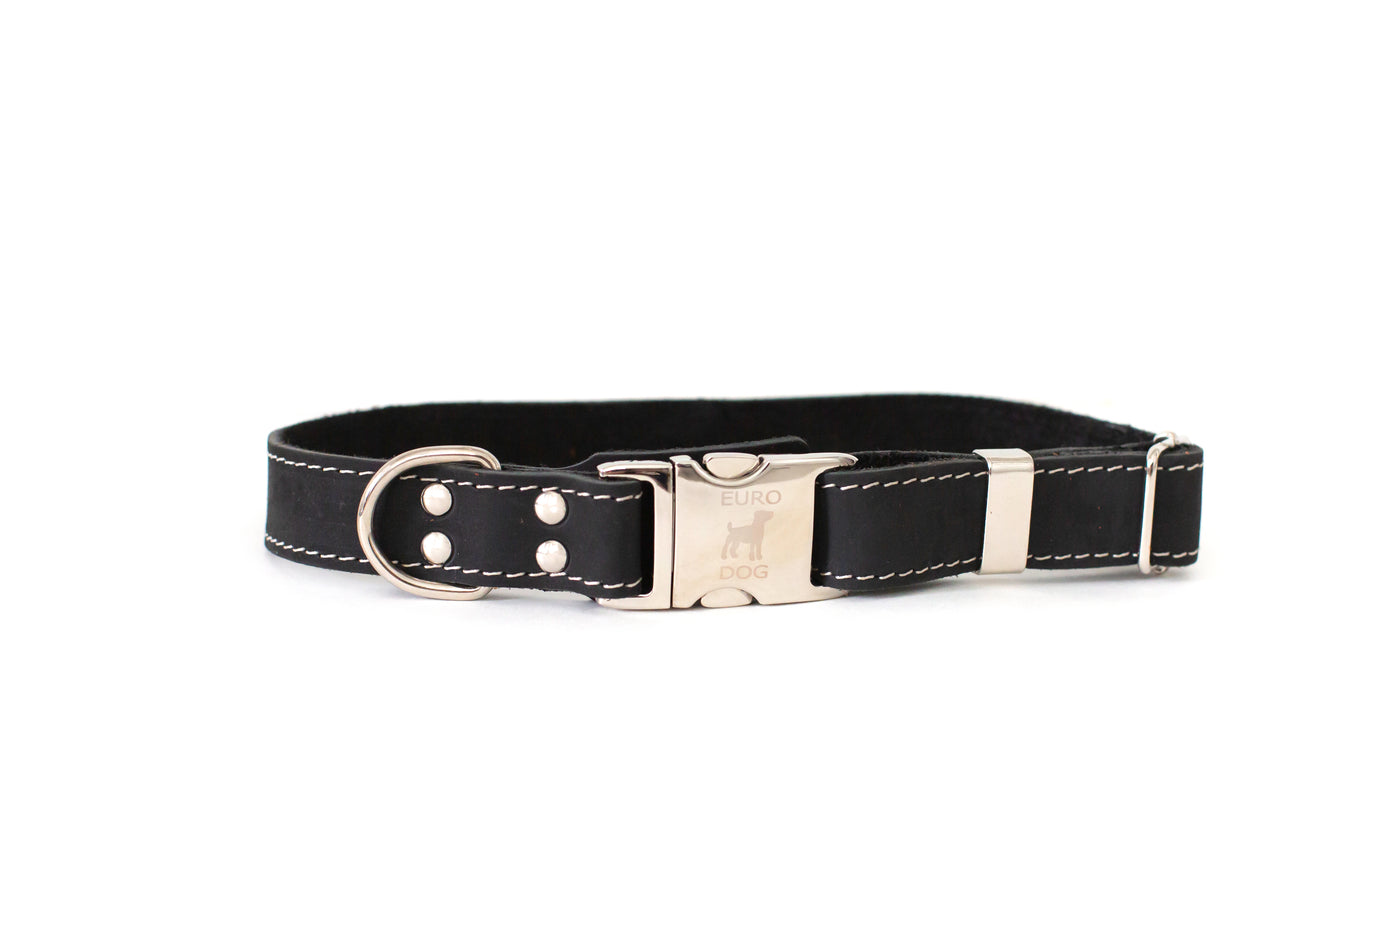 Soft Leather Quick-Release Dog Collar With Metal Buckle